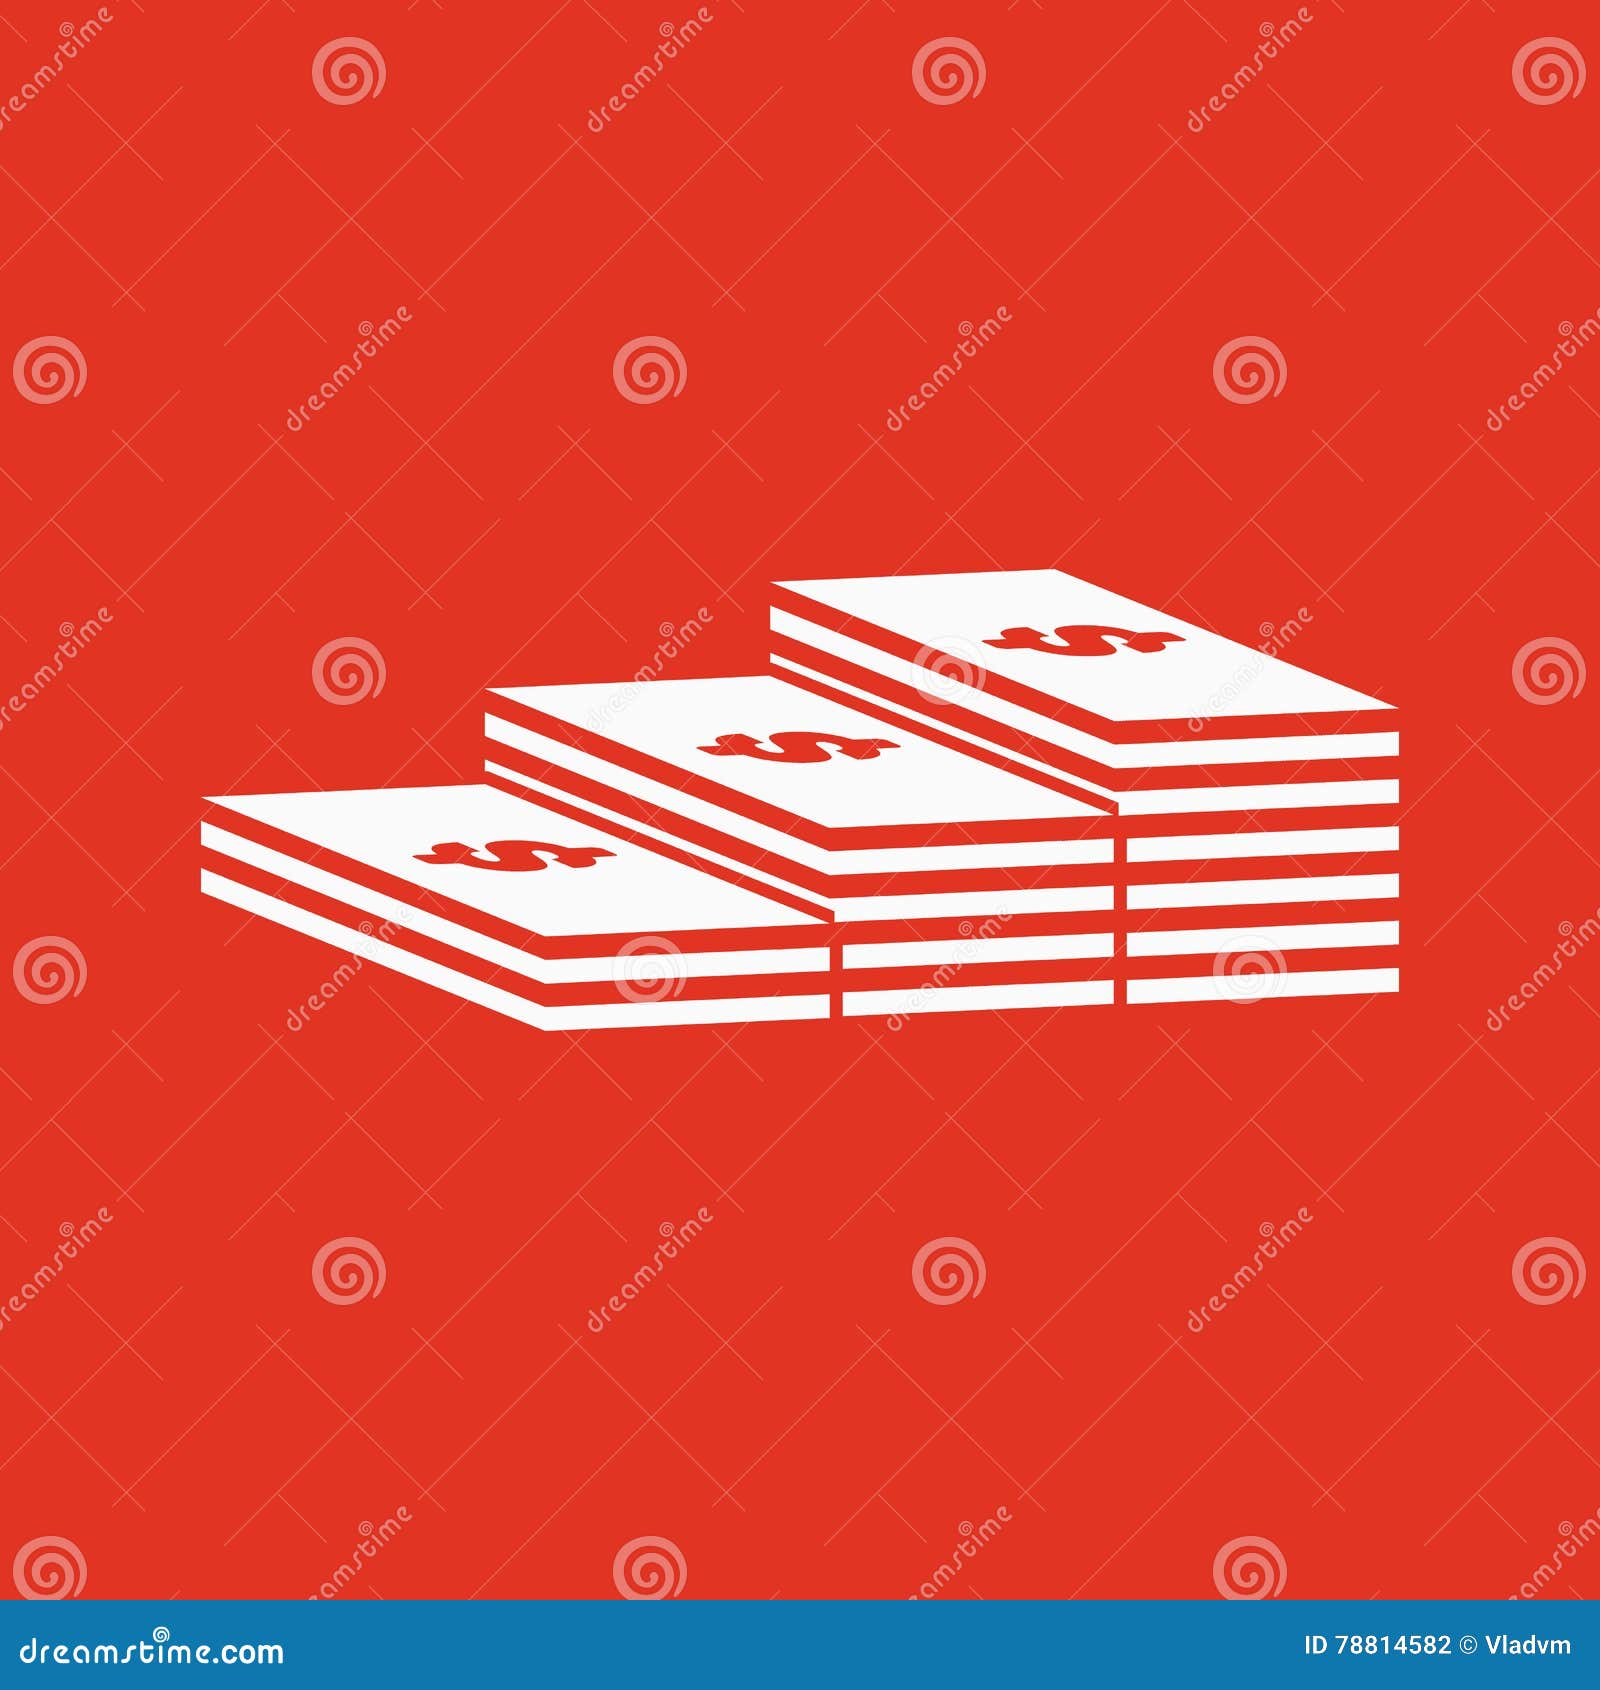 the stack of banknotes icon. greenback, bank note, money . flat